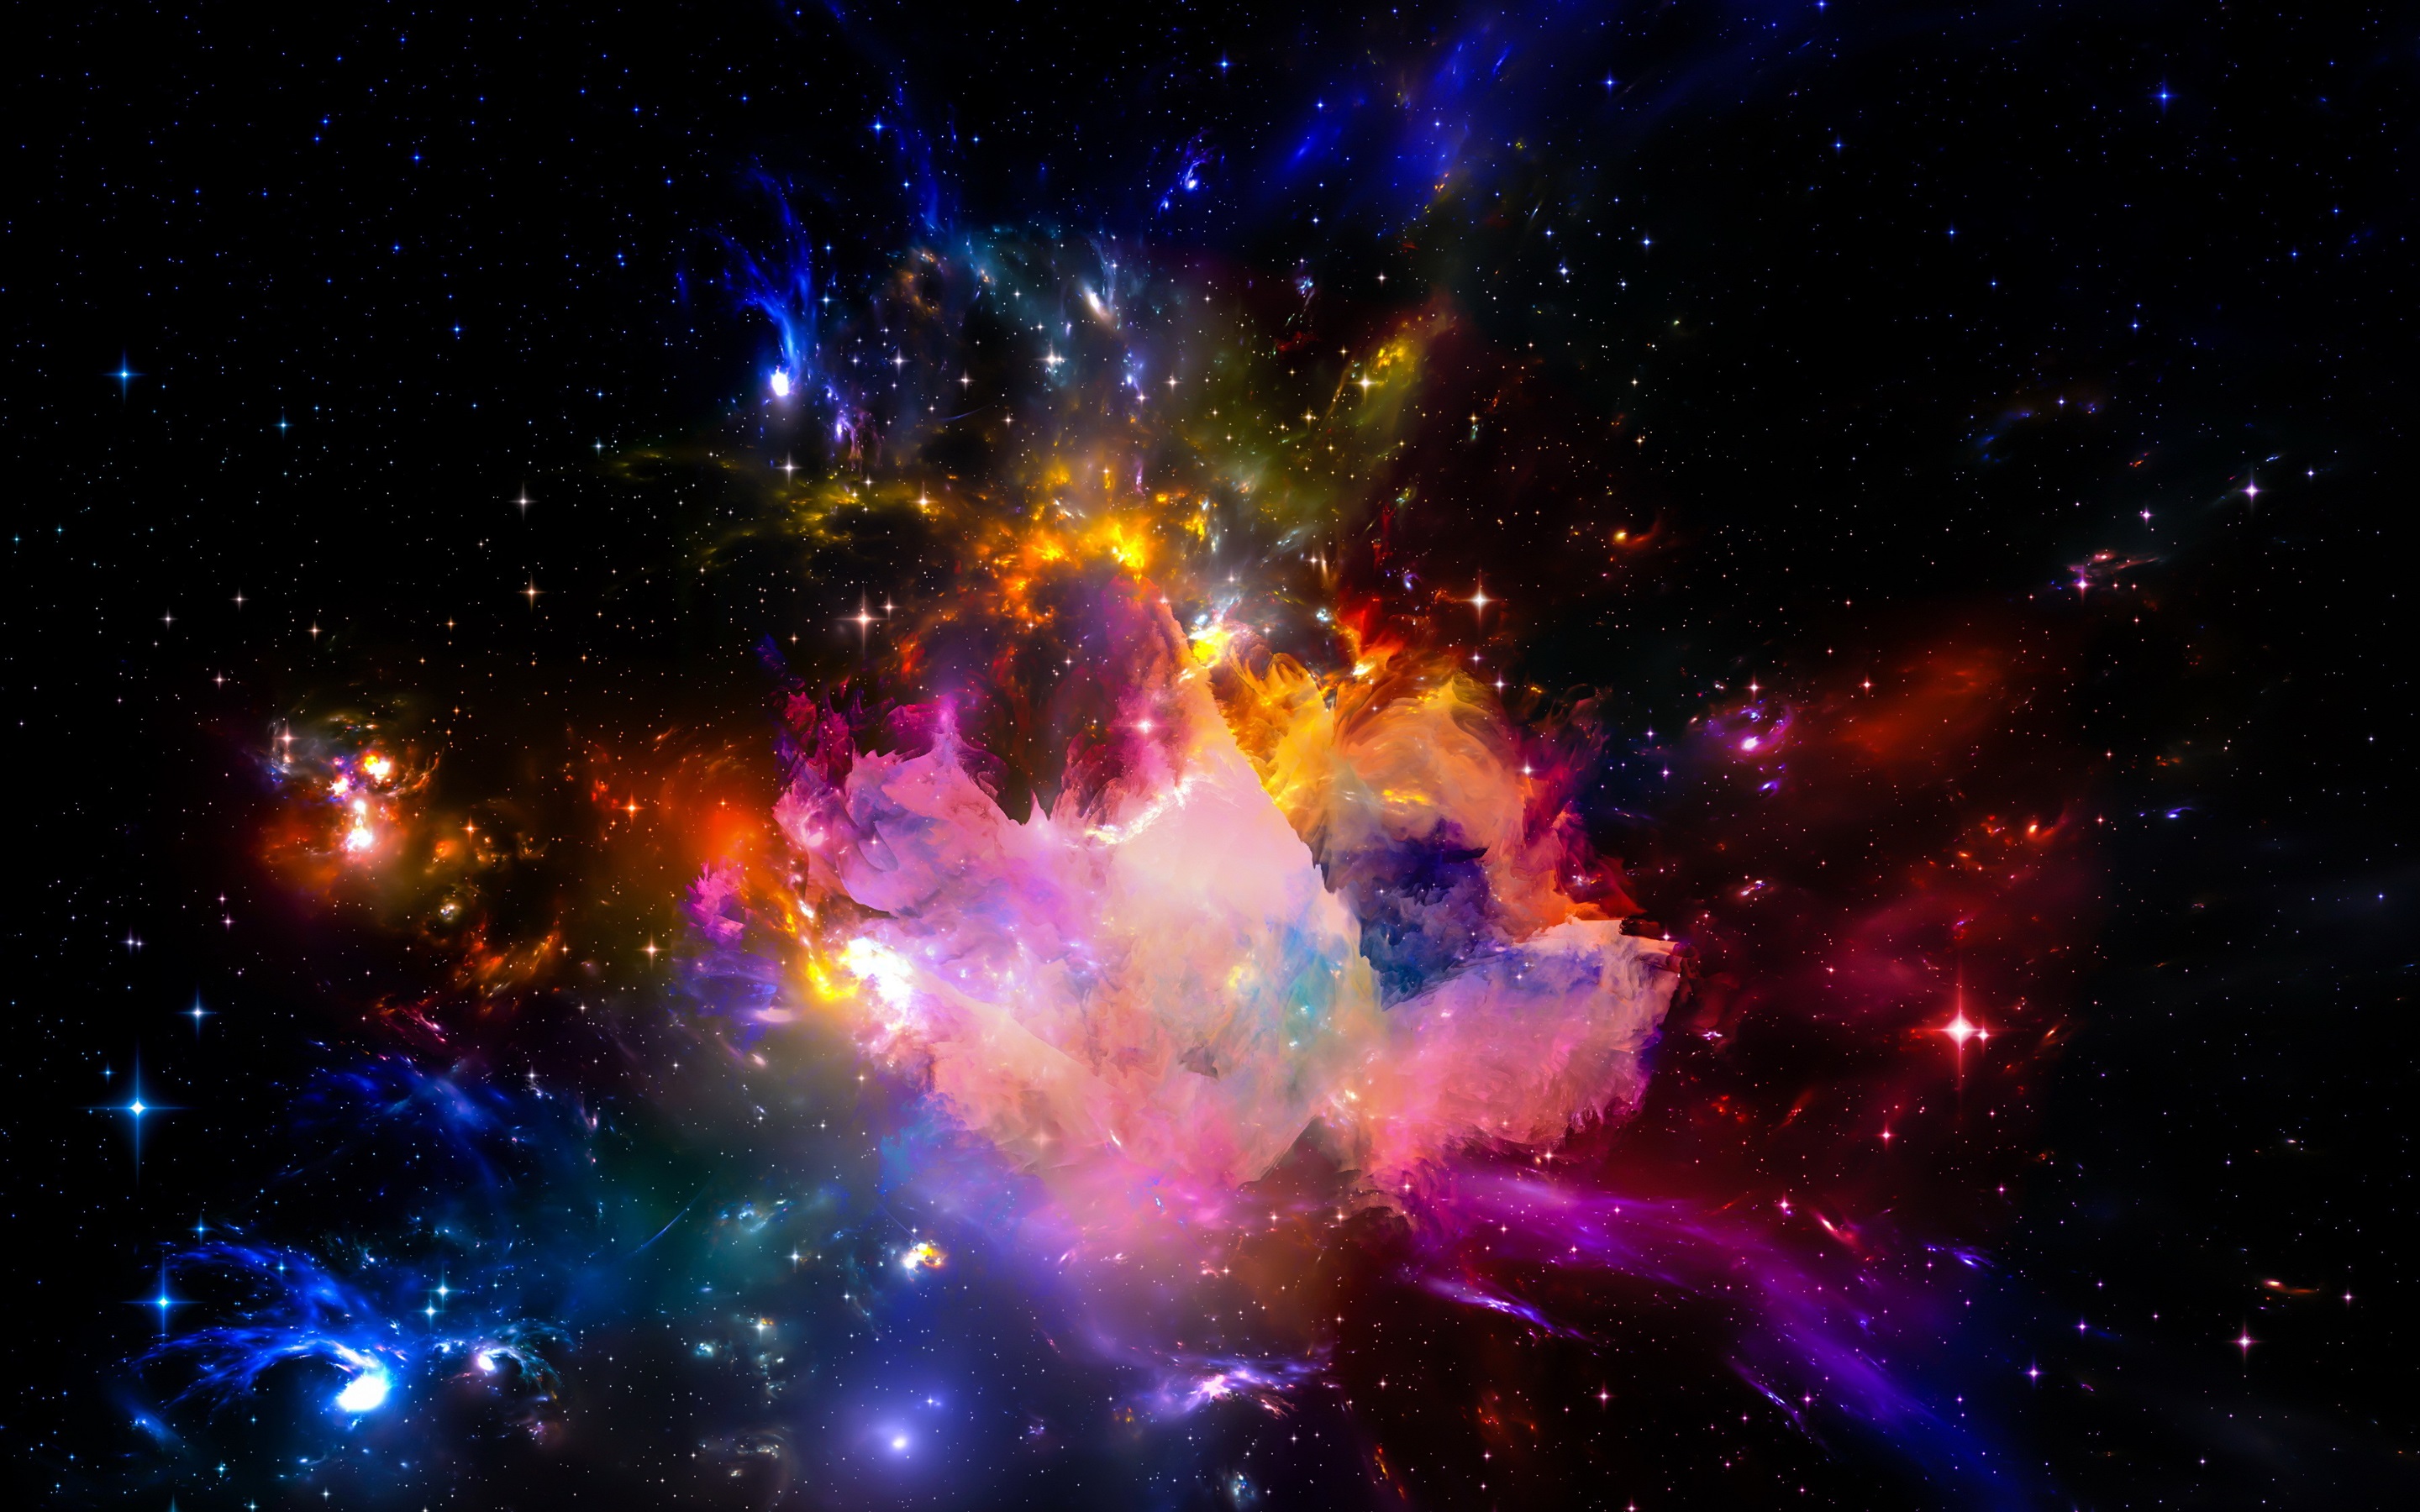 astral wallpaper,nature,nebula,sky,outer space,astronomical object